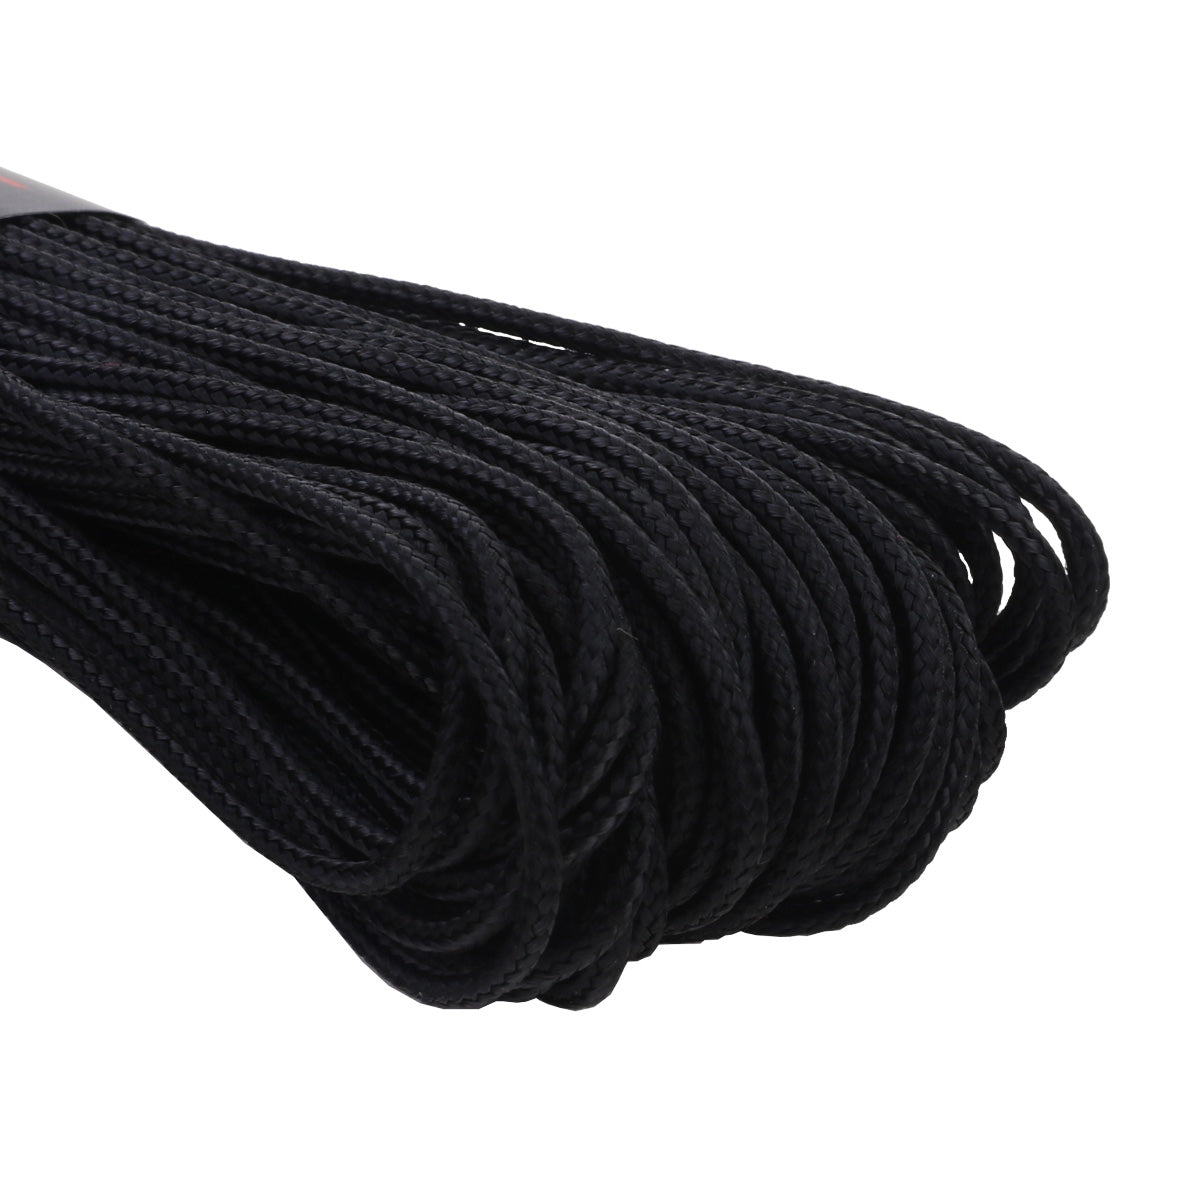 95 Paracord - 300Lb - 2mm - Black – Atwood Rope MFG